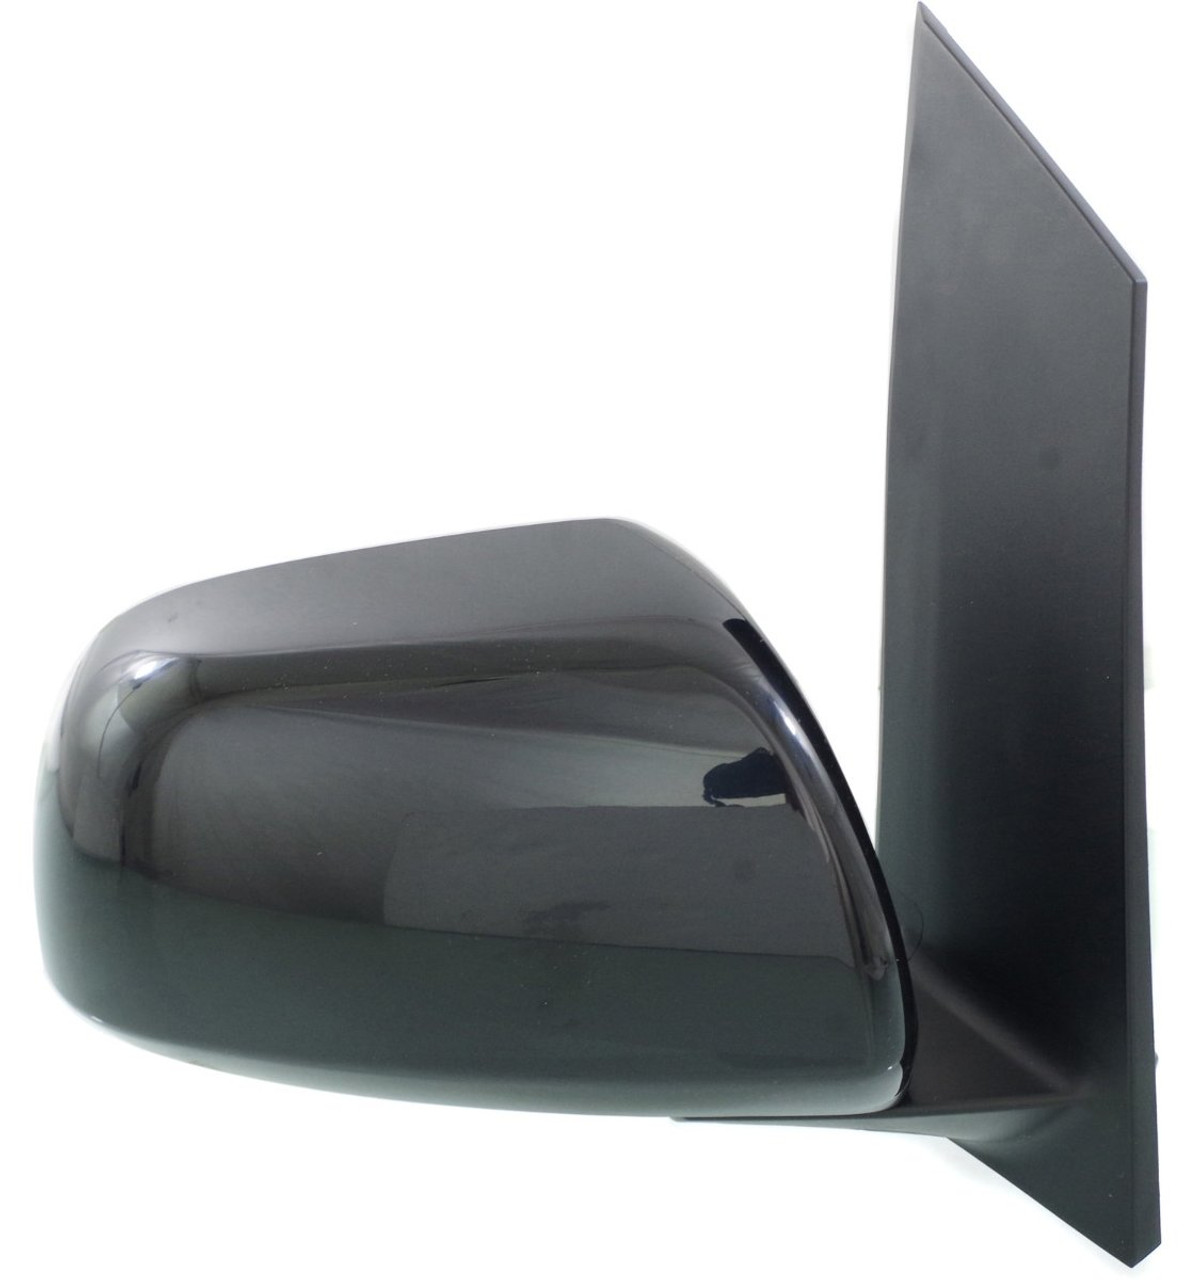 SIENNA 15-20 MIRROR RH, Power, Manual Folding, Heated, Paintable, w/ Blind Spot Glass, w/o Blind Spot Detection and Memory